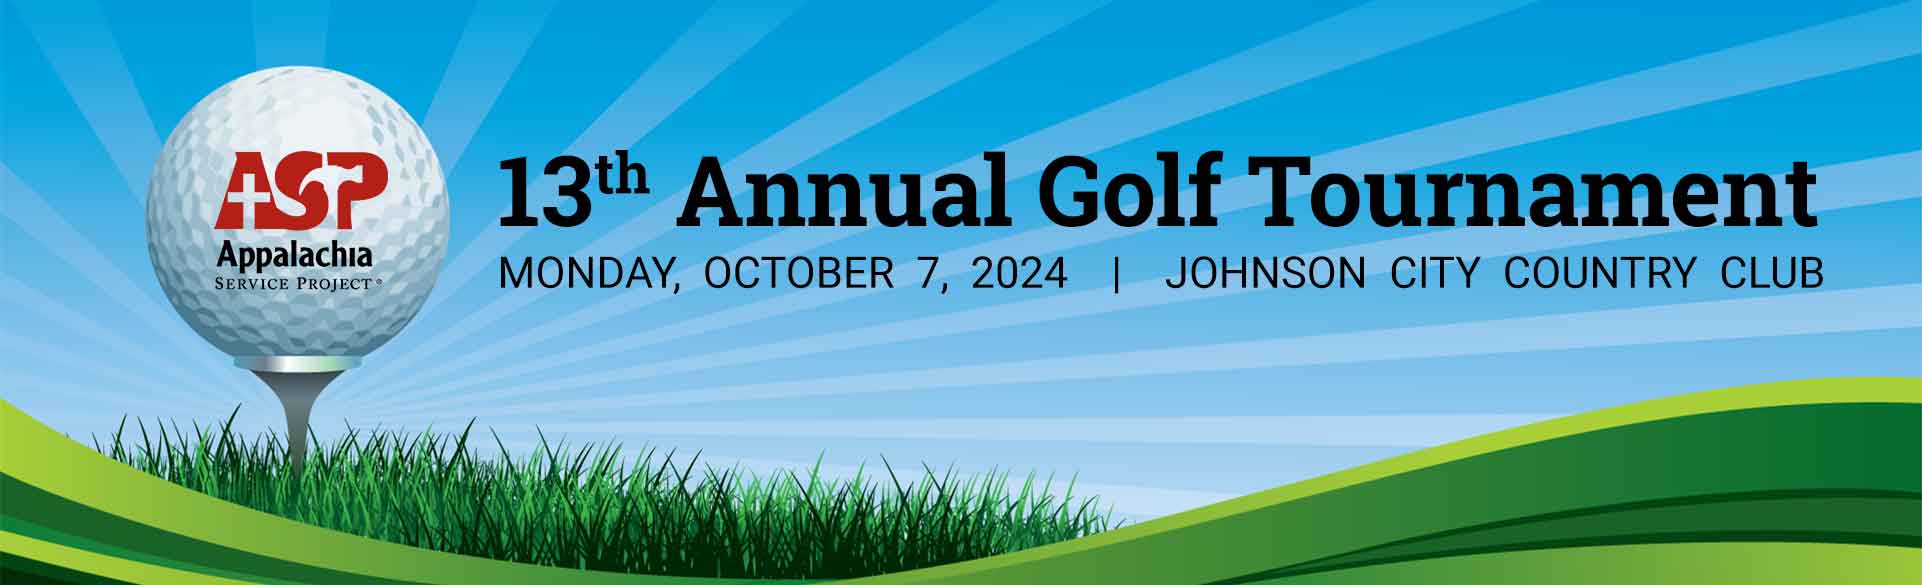 Image of golf ball on a tee, with ASP logo superimposed. 13th Annual Golf Tournament. Monday, October 7, 2024. Johnson City Country Club.